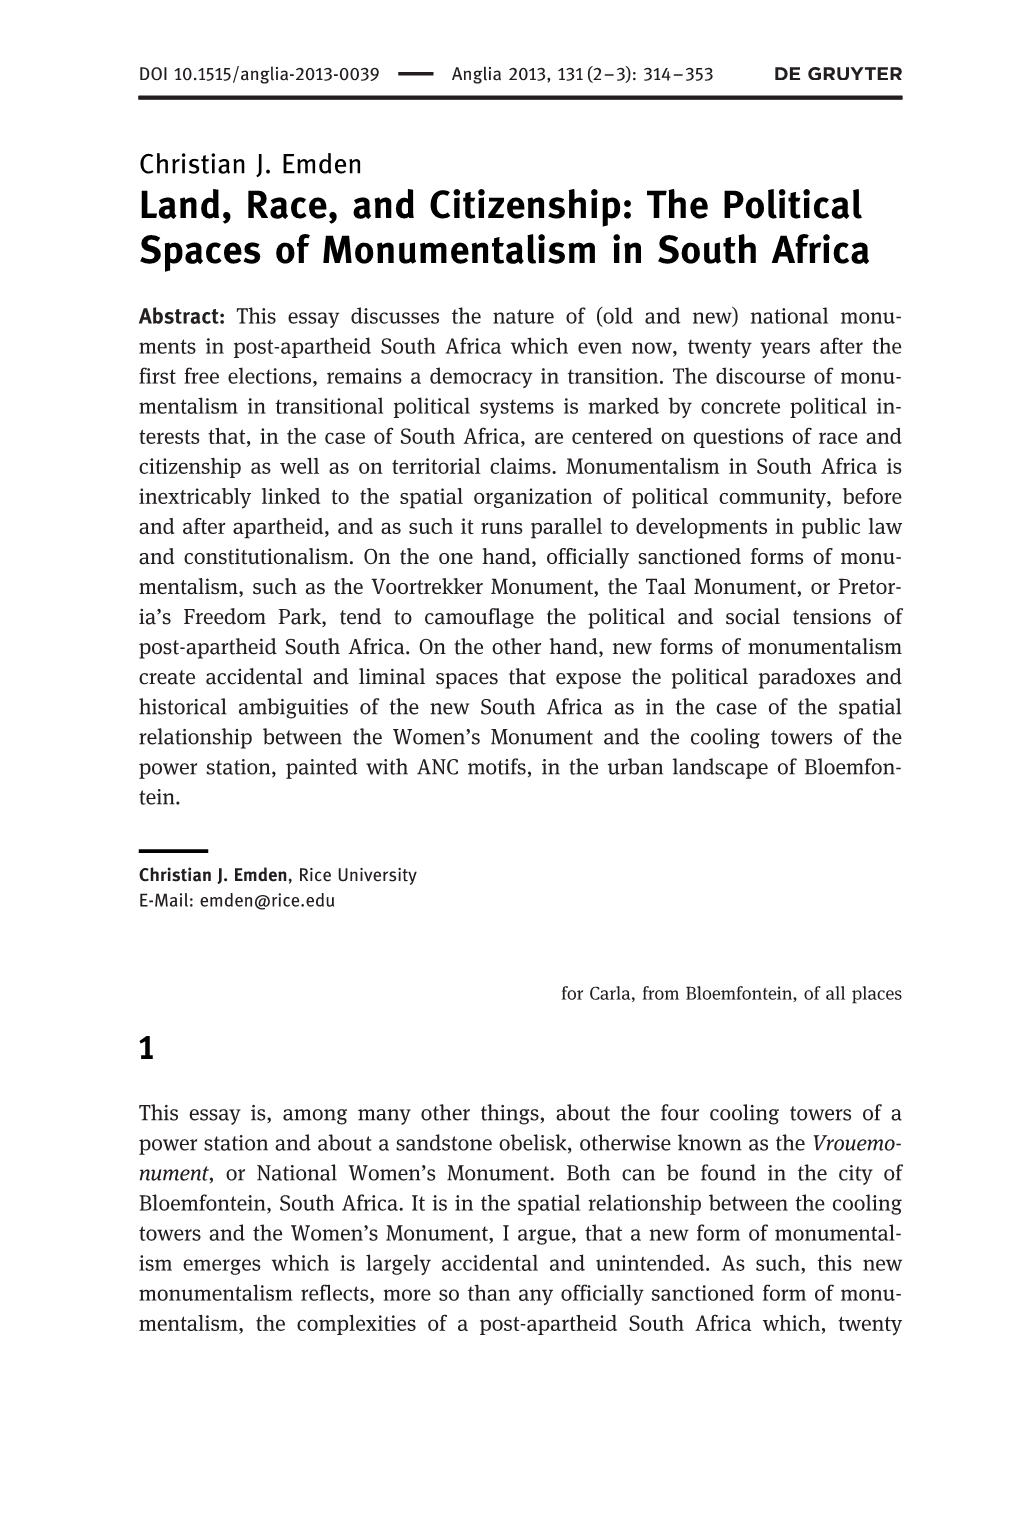 Land, Race, and Citizenship: the Political Spaces of Monumentalism in South Africa